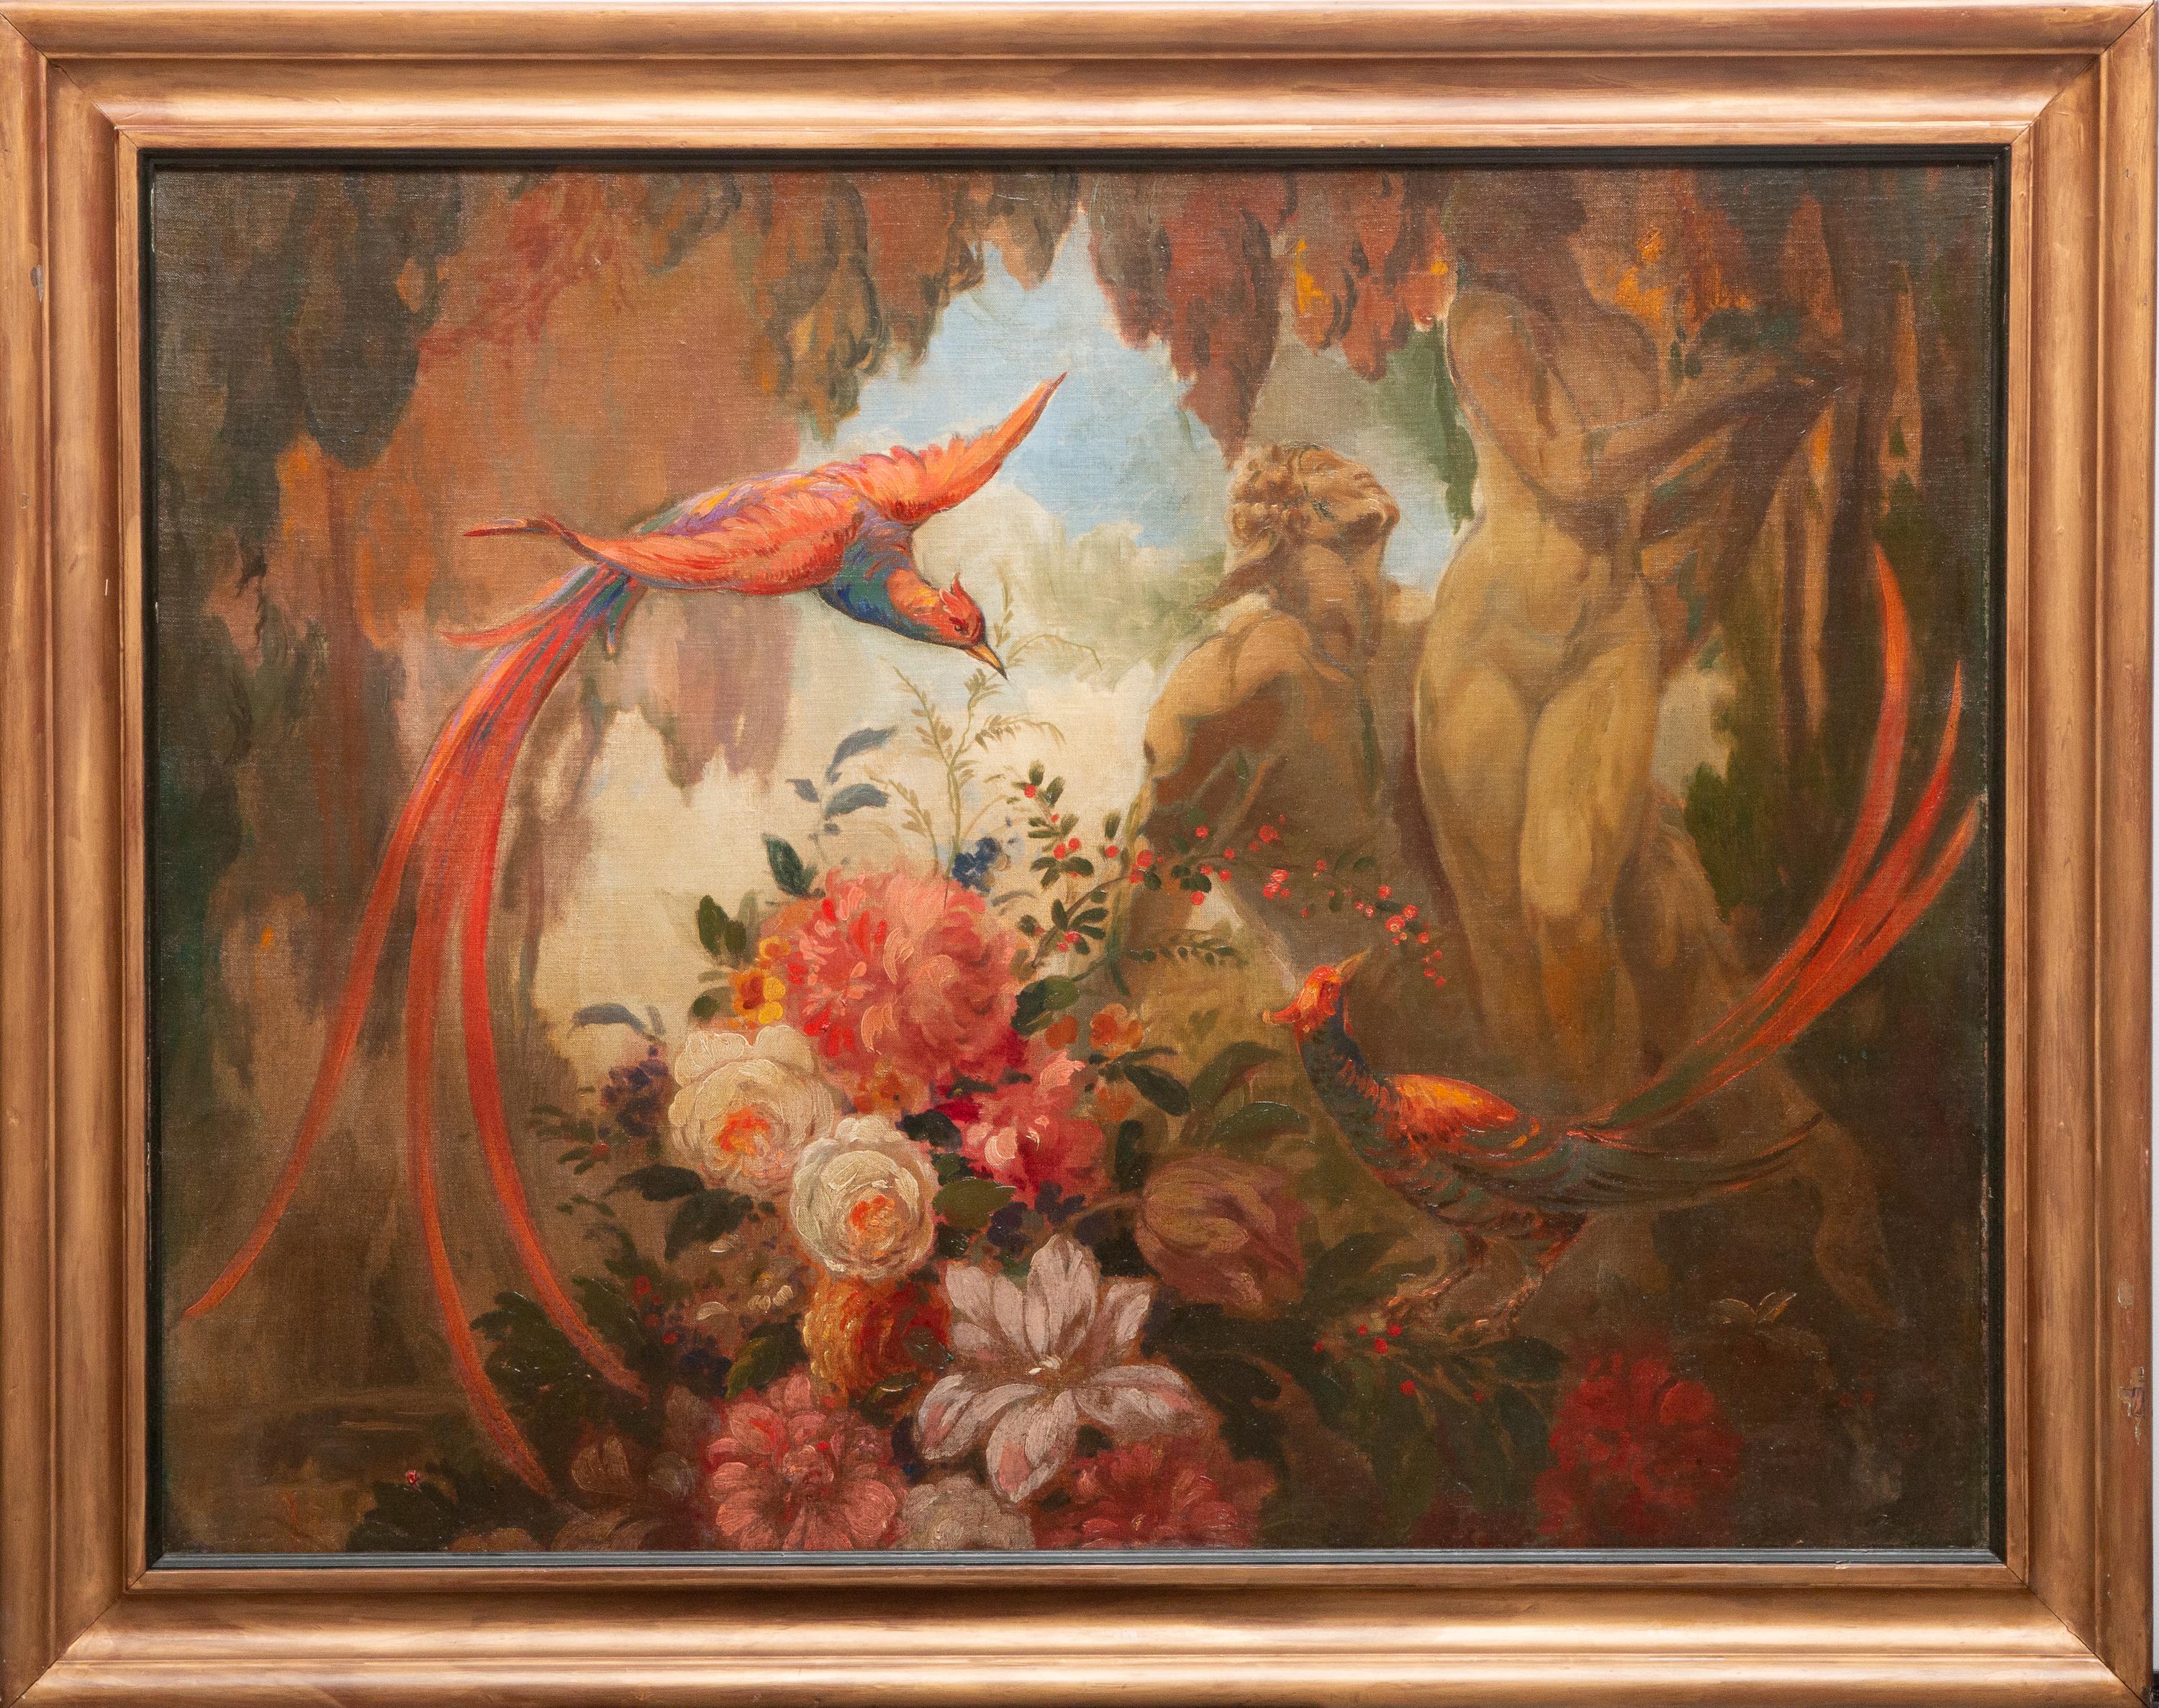 Art Deco Art Nouveau Oil on canvas laid onto masonite depicting Birds, Male and Female Figures in tropical foliate surrounded paradise . From a Long Island, NY collection. Dimensions: 32